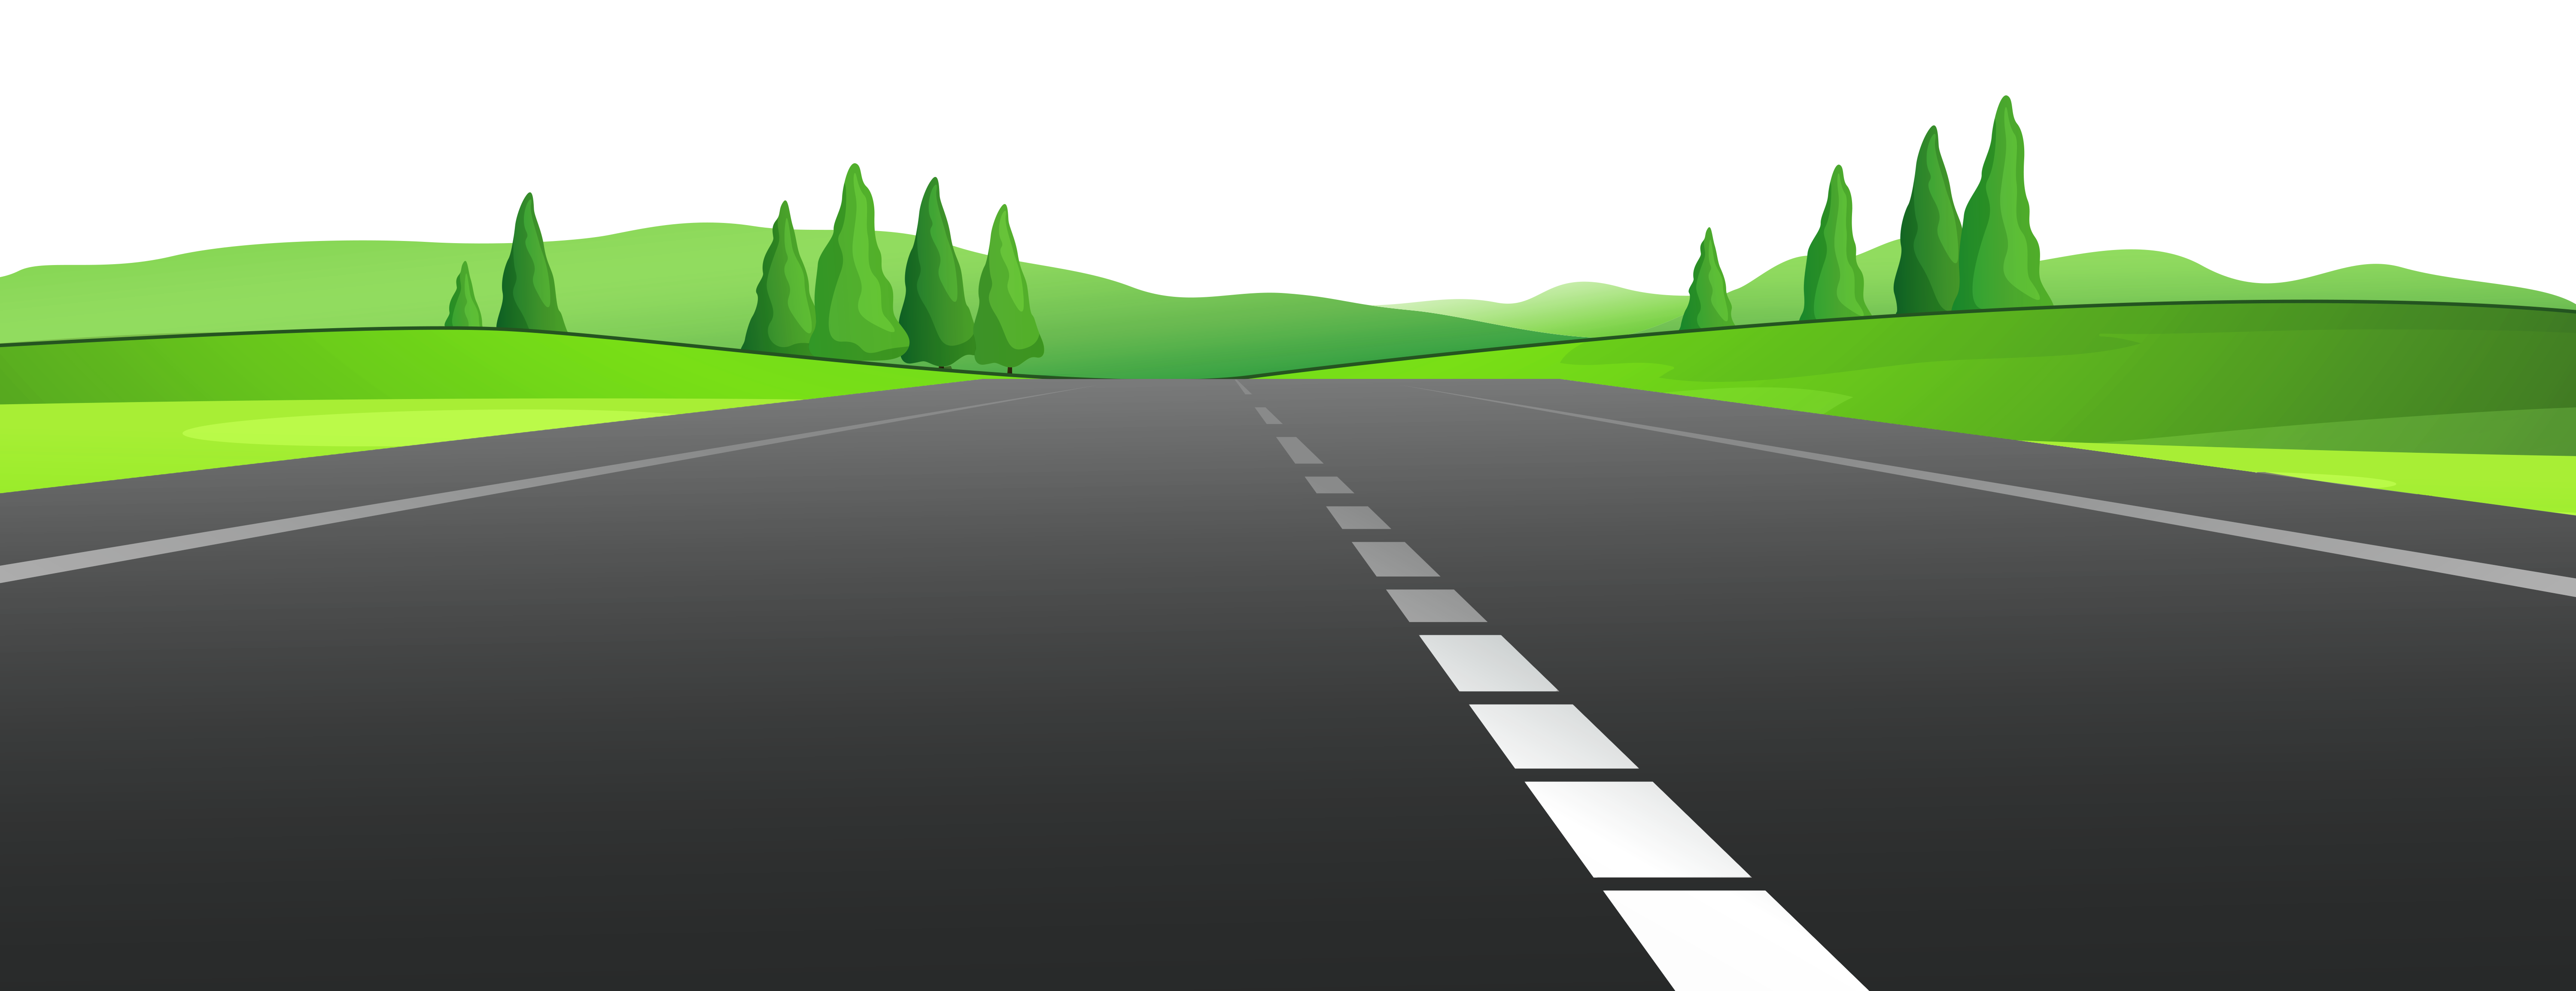 Path clipart curved path. Road with grass png